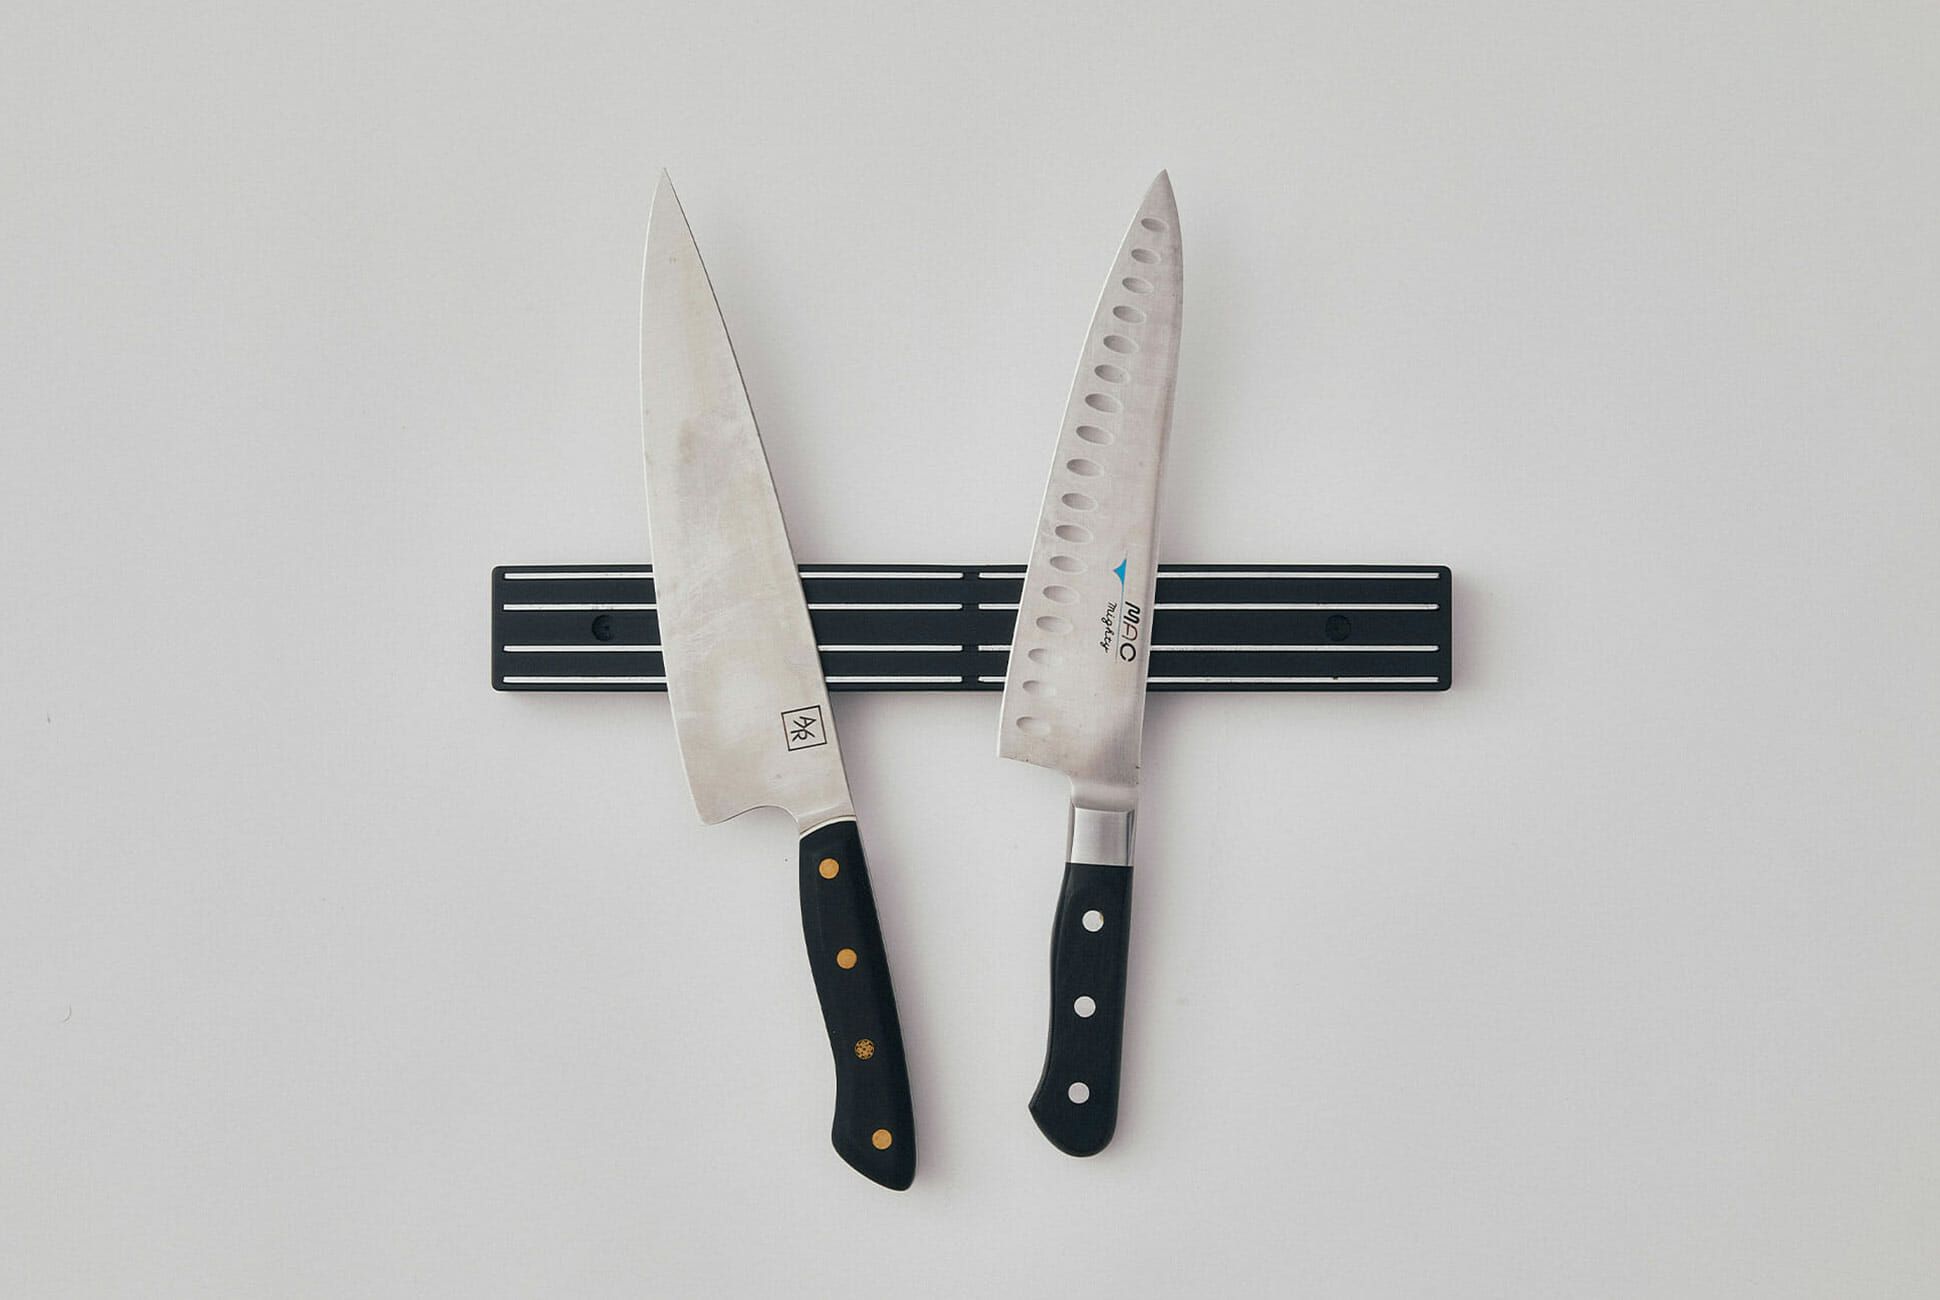 How to Keep Your Kitchen Knives Sharp